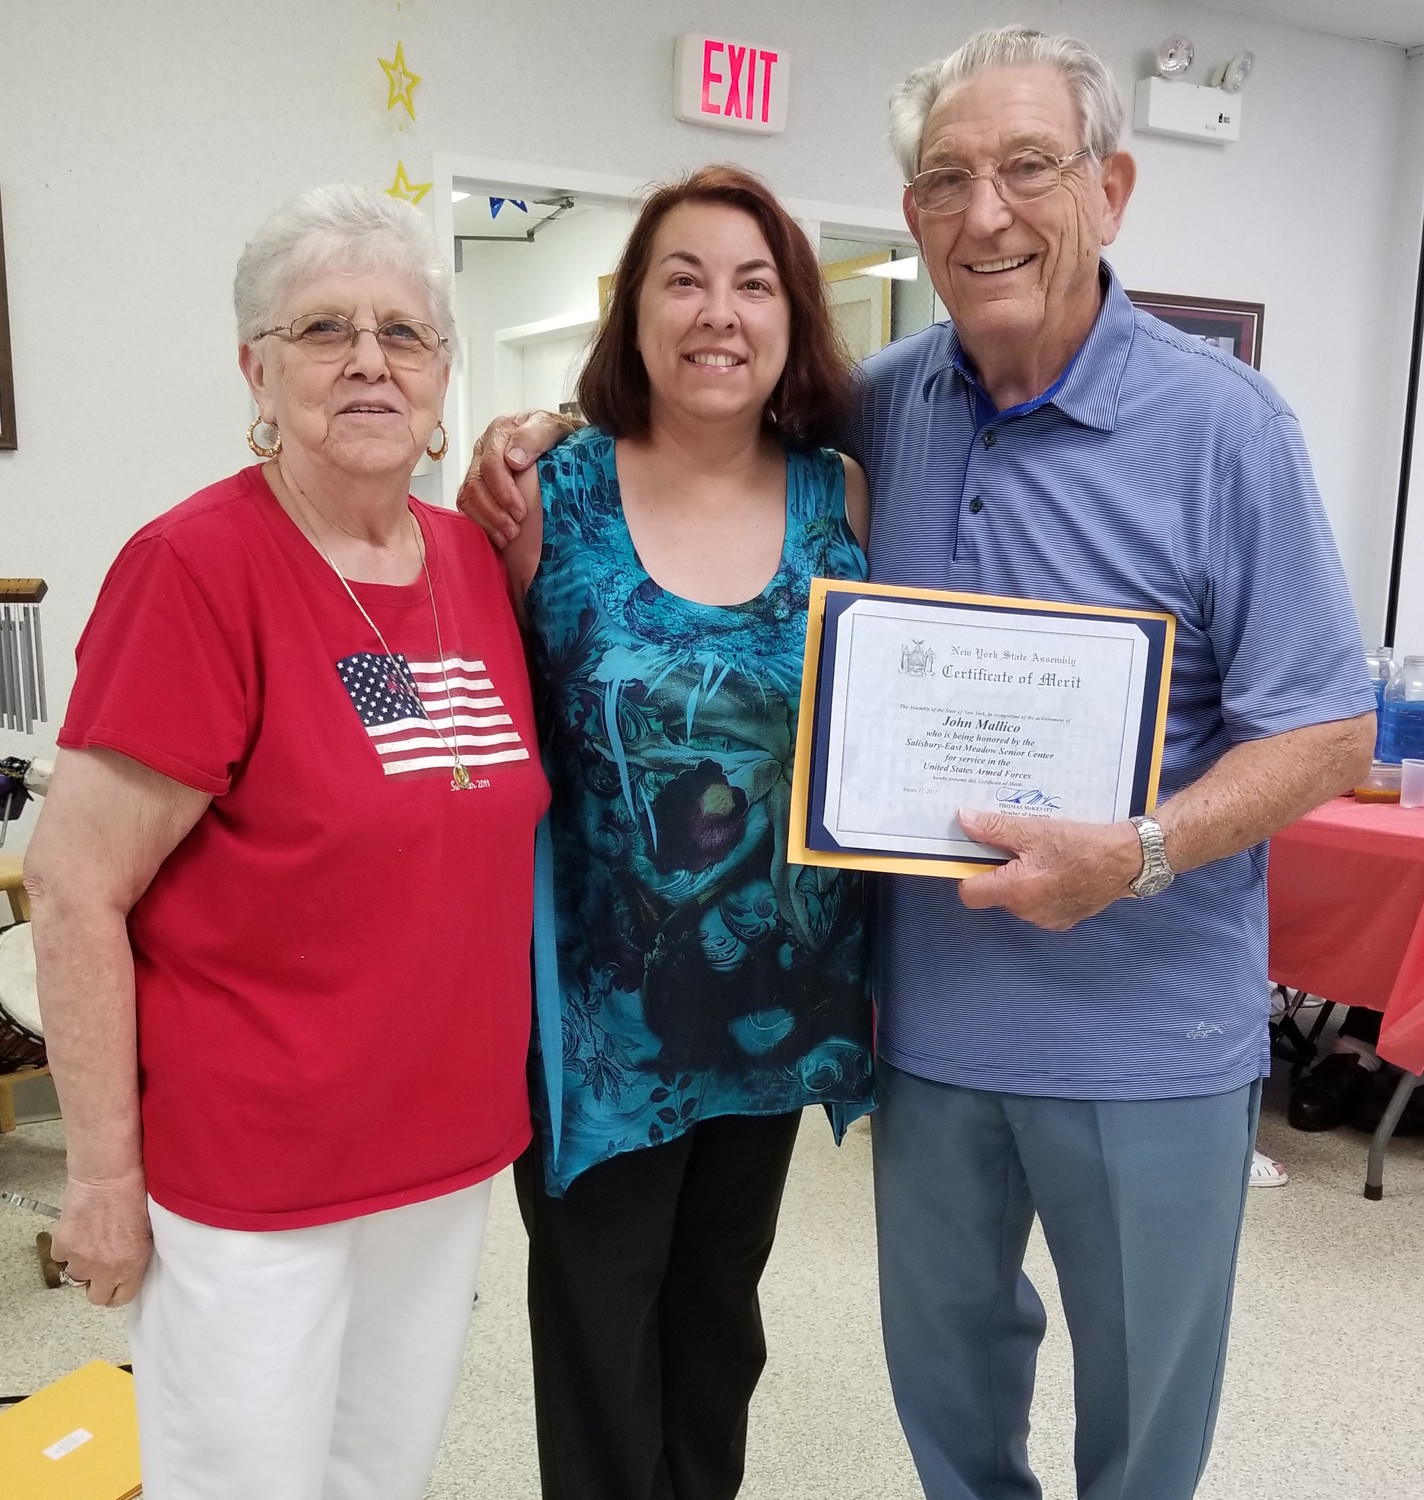 East Meadow's Veterans of Foreign Wars Post 2736 Commander John Mallico